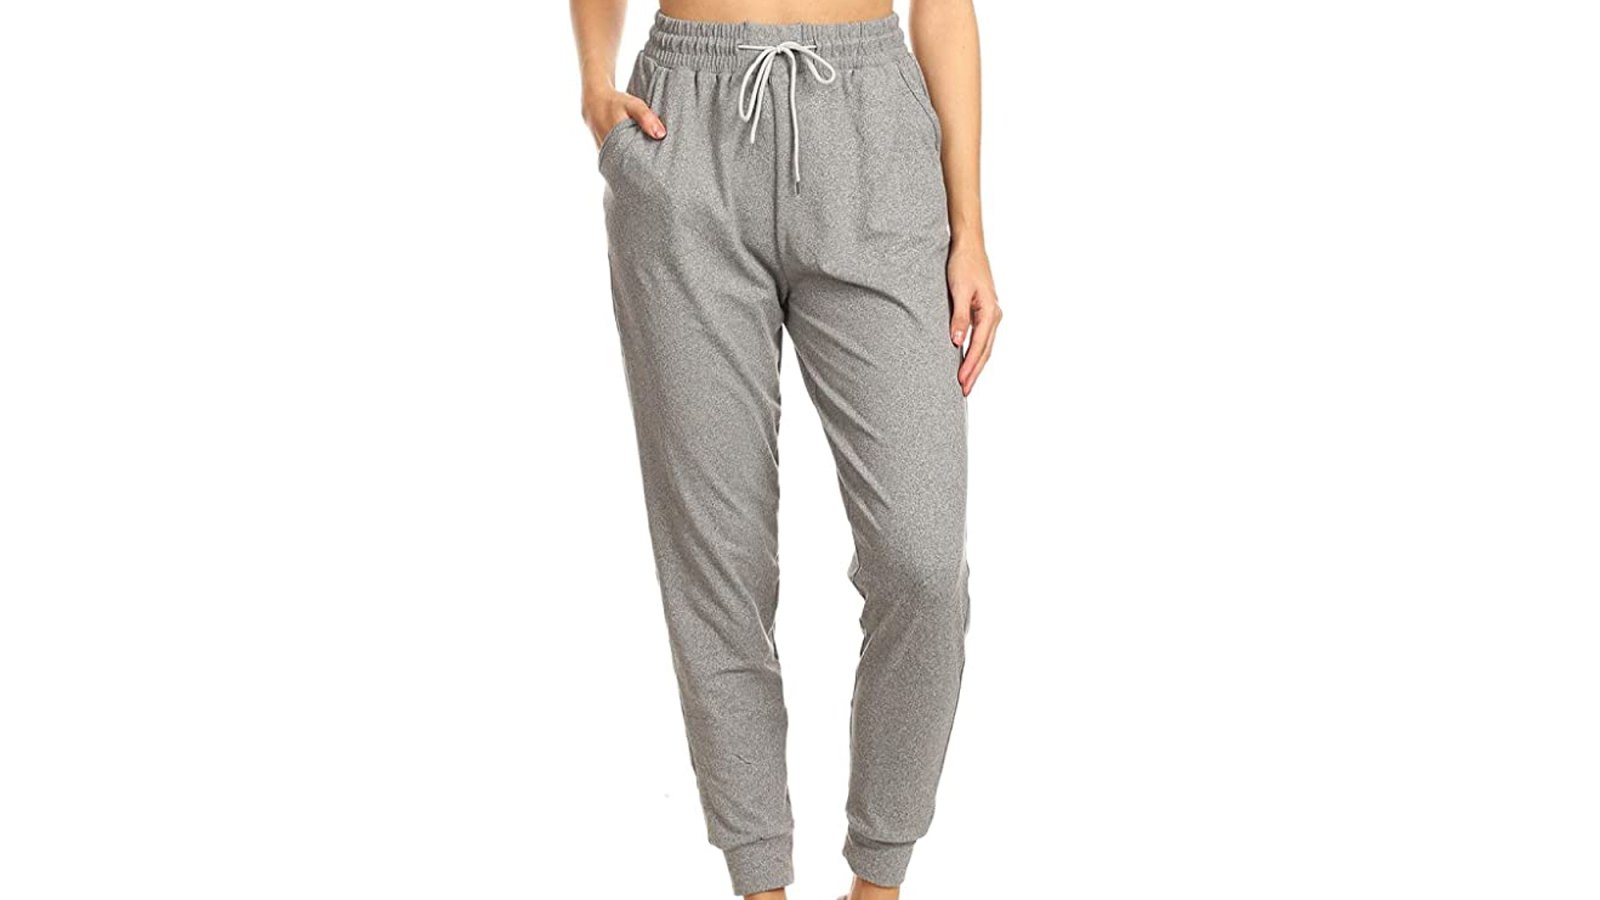 Leggings Depot Joggers Are Seriously Popular on